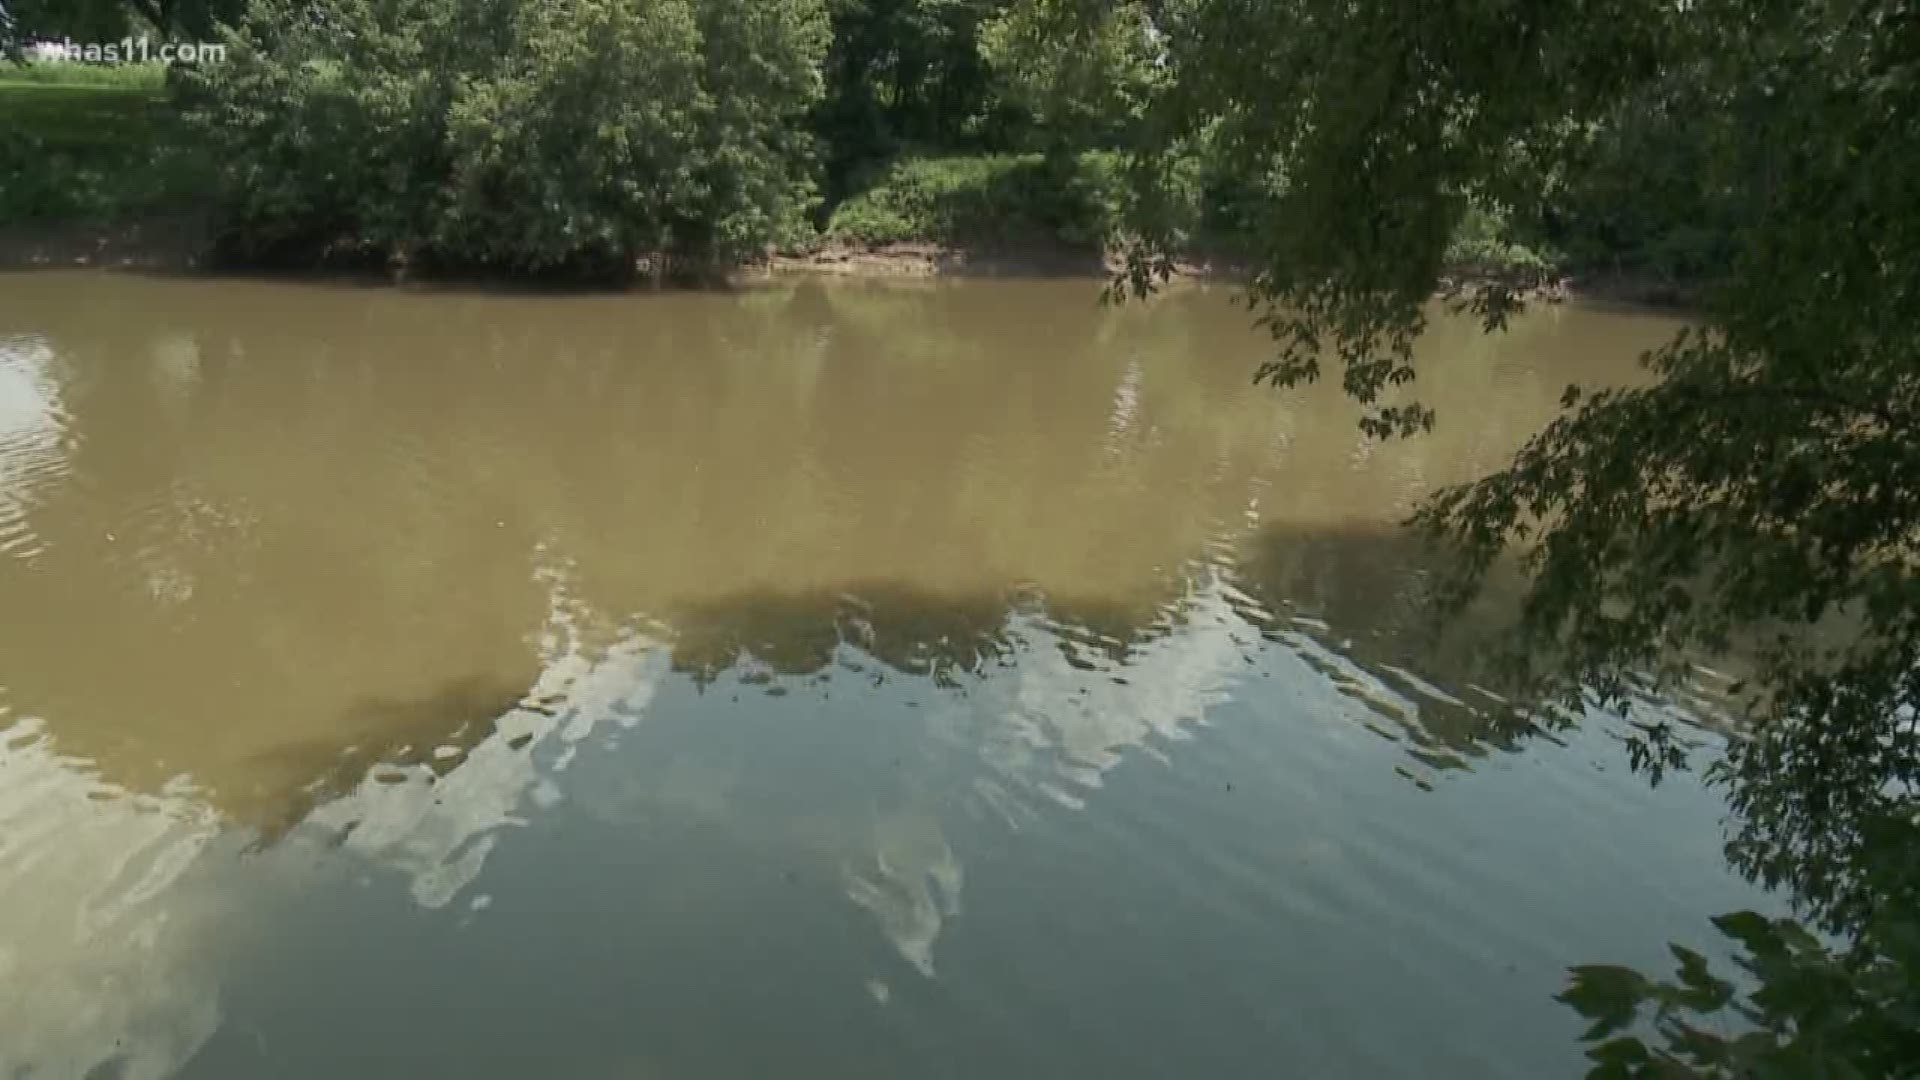 More than a dozen people lost on THE SALT RIVER for hours in Bullitt County -- rescuers called in to help over the weekend. The group tubing on the Salt River was supposed to be pulled out in one location. instead they  ended up miles away near Fort Knox,